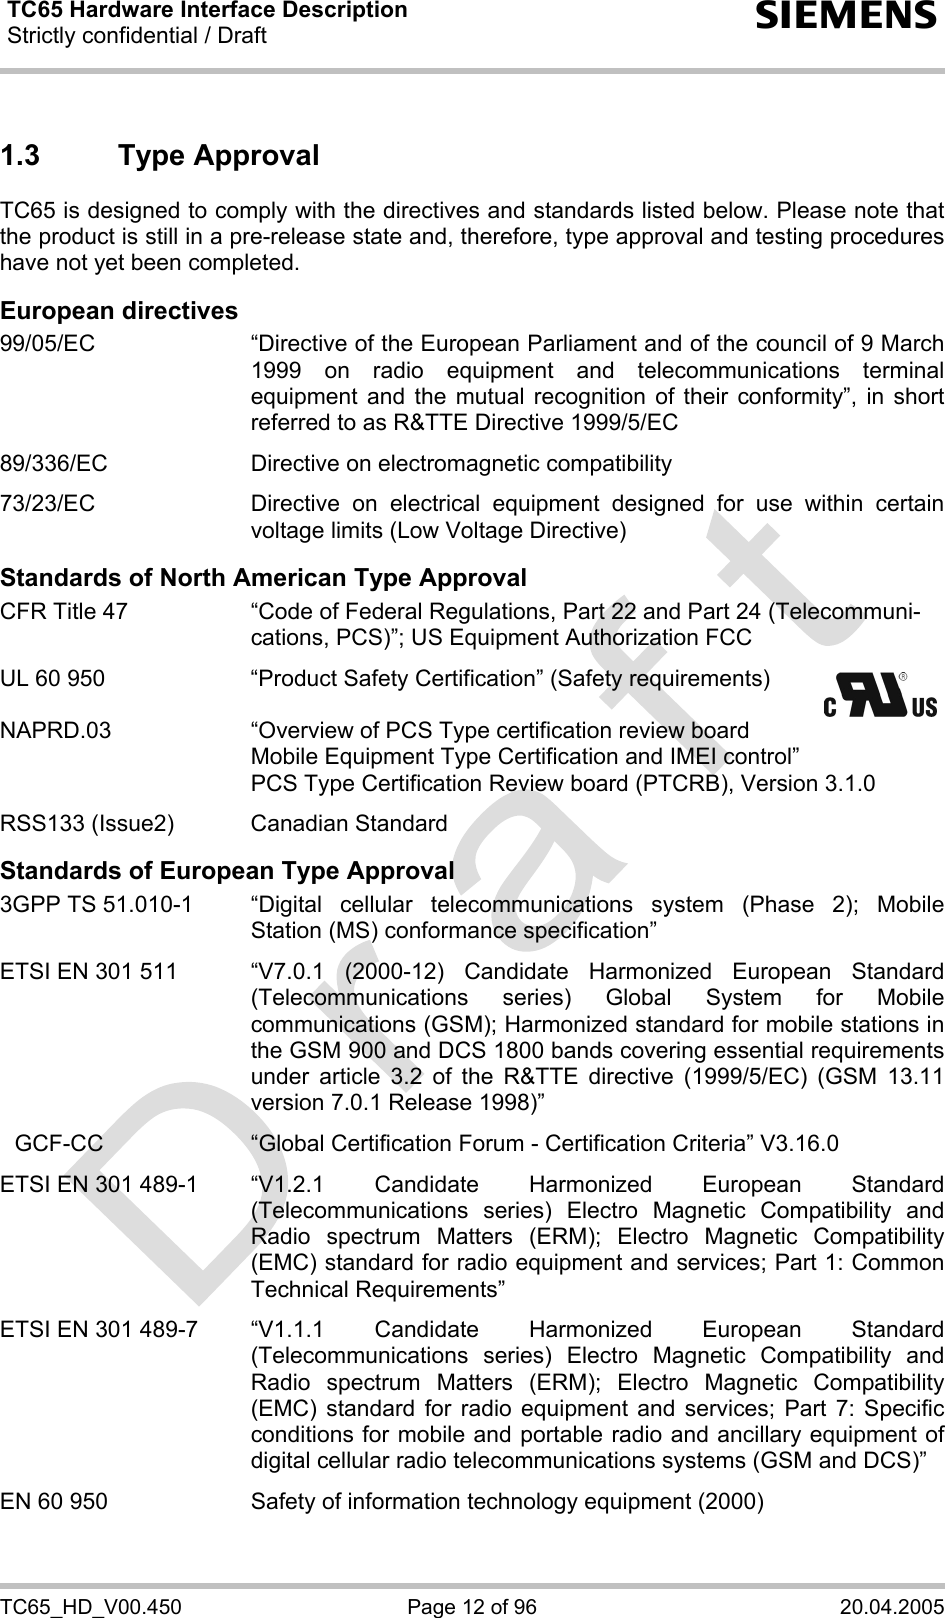 TC65 Hardware Interface Description Strictly confidential / Draft  s TC65_HD_V00.450  Page 12 of 96  20.04.2005 1.3 Type Approval TC65 is designed to comply with the directives and standards listed below. Please note that the product is still in a pre-release state and, therefore, type approval and testing procedures have not yet been completed.  European directives 99/05/EC  “Directive of the European Parliament and of the council of 9 March 1999 on radio equipment and telecommunications terminal equipment and the mutual recognition of their conformity”, in short referred to as R&amp;TTE Directive 1999/5/EC  89/336/EC  Directive on electromagnetic compatibility  73/23/EC  Directive on electrical equipment designed for use within certain voltage limits (Low Voltage Directive)  Standards of North American Type Approval CFR Title 47  “Code of Federal Regulations, Part 22 and Part 24 (Telecommuni-cations, PCS)”; US Equipment Authorization FCC  UL 60 950  “Product Safety Certification” (Safety requirements)      NAPRD.03  “Overview of PCS Type certification review board      Mobile Equipment Type Certification and IMEI control”     PCS Type Certification Review board (PTCRB), Version 3.1.0  RSS133 (Issue2)  Canadian Standard  Standards of European Type Approval 3GPP TS 51.010-1  “Digital  cellular  telecommunications system (Phase 2); Mobile Station (MS) conformance specification”  ETSI EN 301 511  “V7.0.1  (2000-12)  Candidate  Harmonized  European  Standard (Telecommunications series) Global System for Mobile communications (GSM); Harmonized standard for mobile stations in the GSM 900 and DCS 1800 bands covering essential requirements under article 3.2 of the R&amp;TTE directive (1999/5/EC) (GSM 13.11 version 7.0.1 Release 1998)”   GCF-CC  “Global Certification Forum - Certification Criteria” V3.16.0   ETSI EN 301 489-1  “V1.2.1  Candidate  Harmonized  European  Standard (Telecommunications series) Electro Magnetic Compatibility and Radio spectrum Matters (ERM); Electro Magnetic Compatibility (EMC) standard for radio equipment and services; Part 1: Common Technical Requirements”  ETSI EN 301 489-7  “V1.1.1  Candidate  Harmonized  European  Standard (Telecommunications series) Electro Magnetic Compatibility and Radio spectrum Matters (ERM); Electro Magnetic Compatibility (EMC) standard for radio equipment and services; Part 7: Specific conditions for mobile and portable radio and ancillary equipment of digital cellular radio telecommunications systems (GSM and DCS)”   EN 60 950  Safety of information technology equipment (2000)  